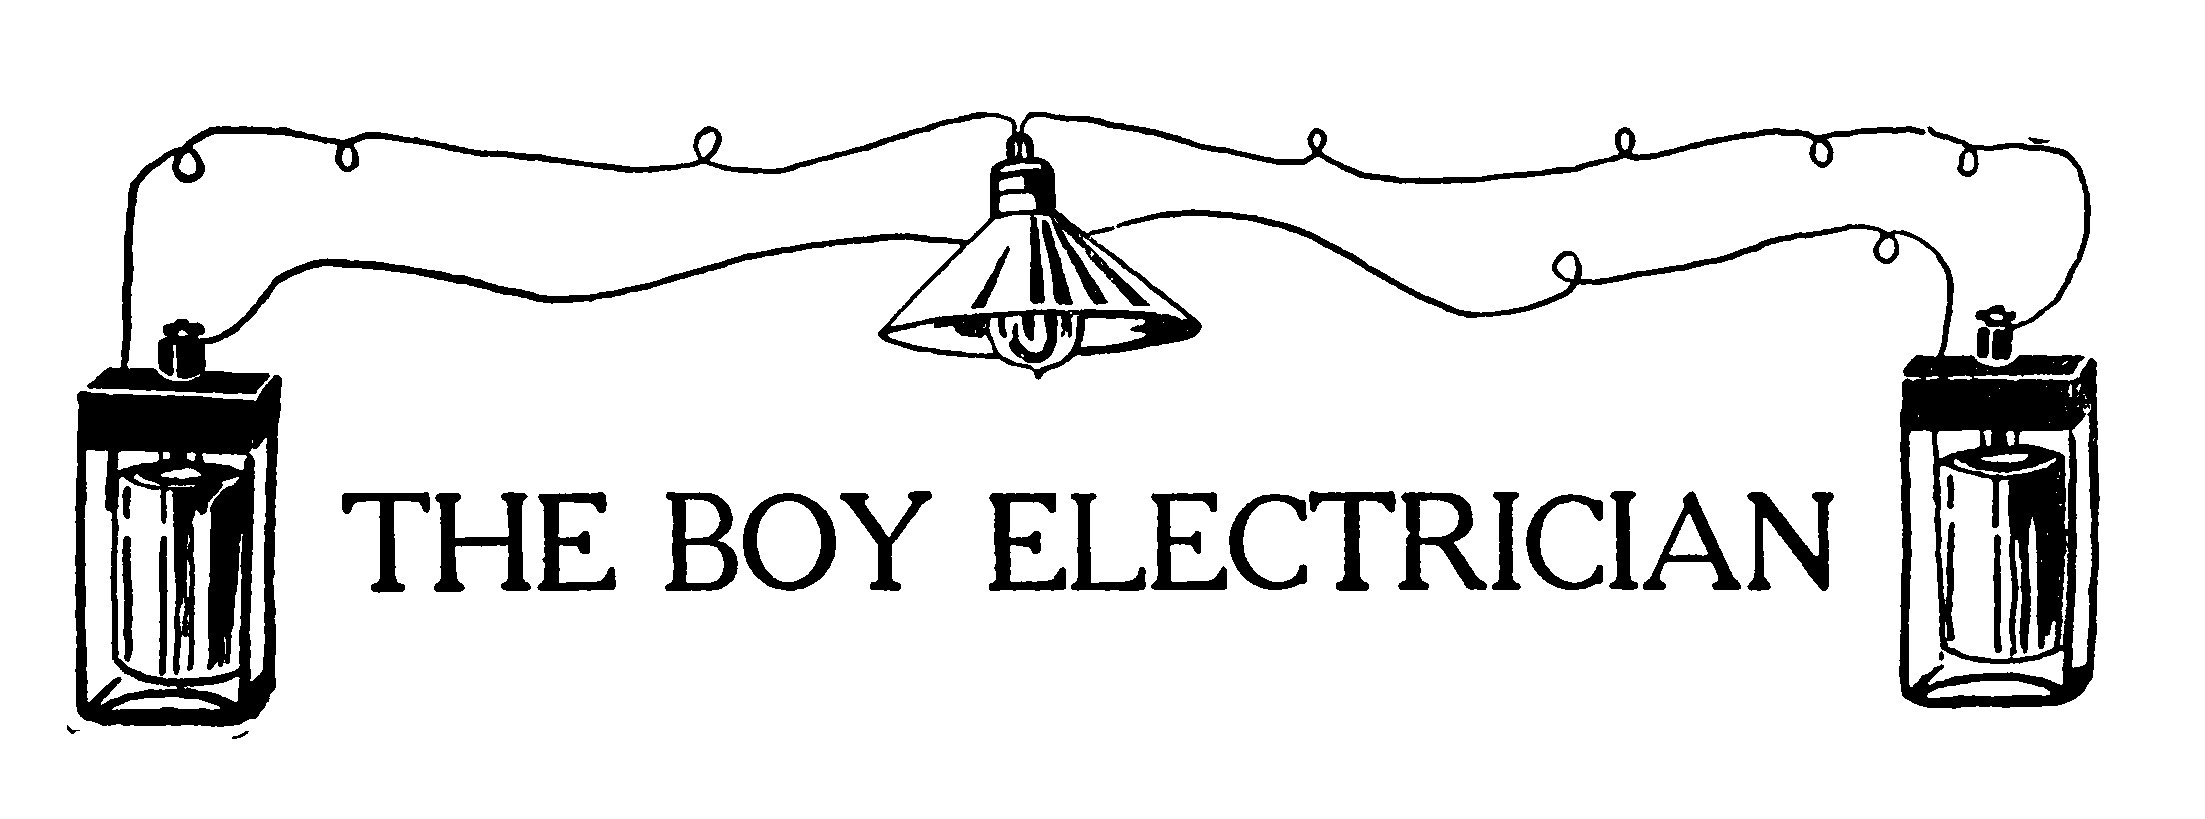 THE BOY ELECTRICIAN